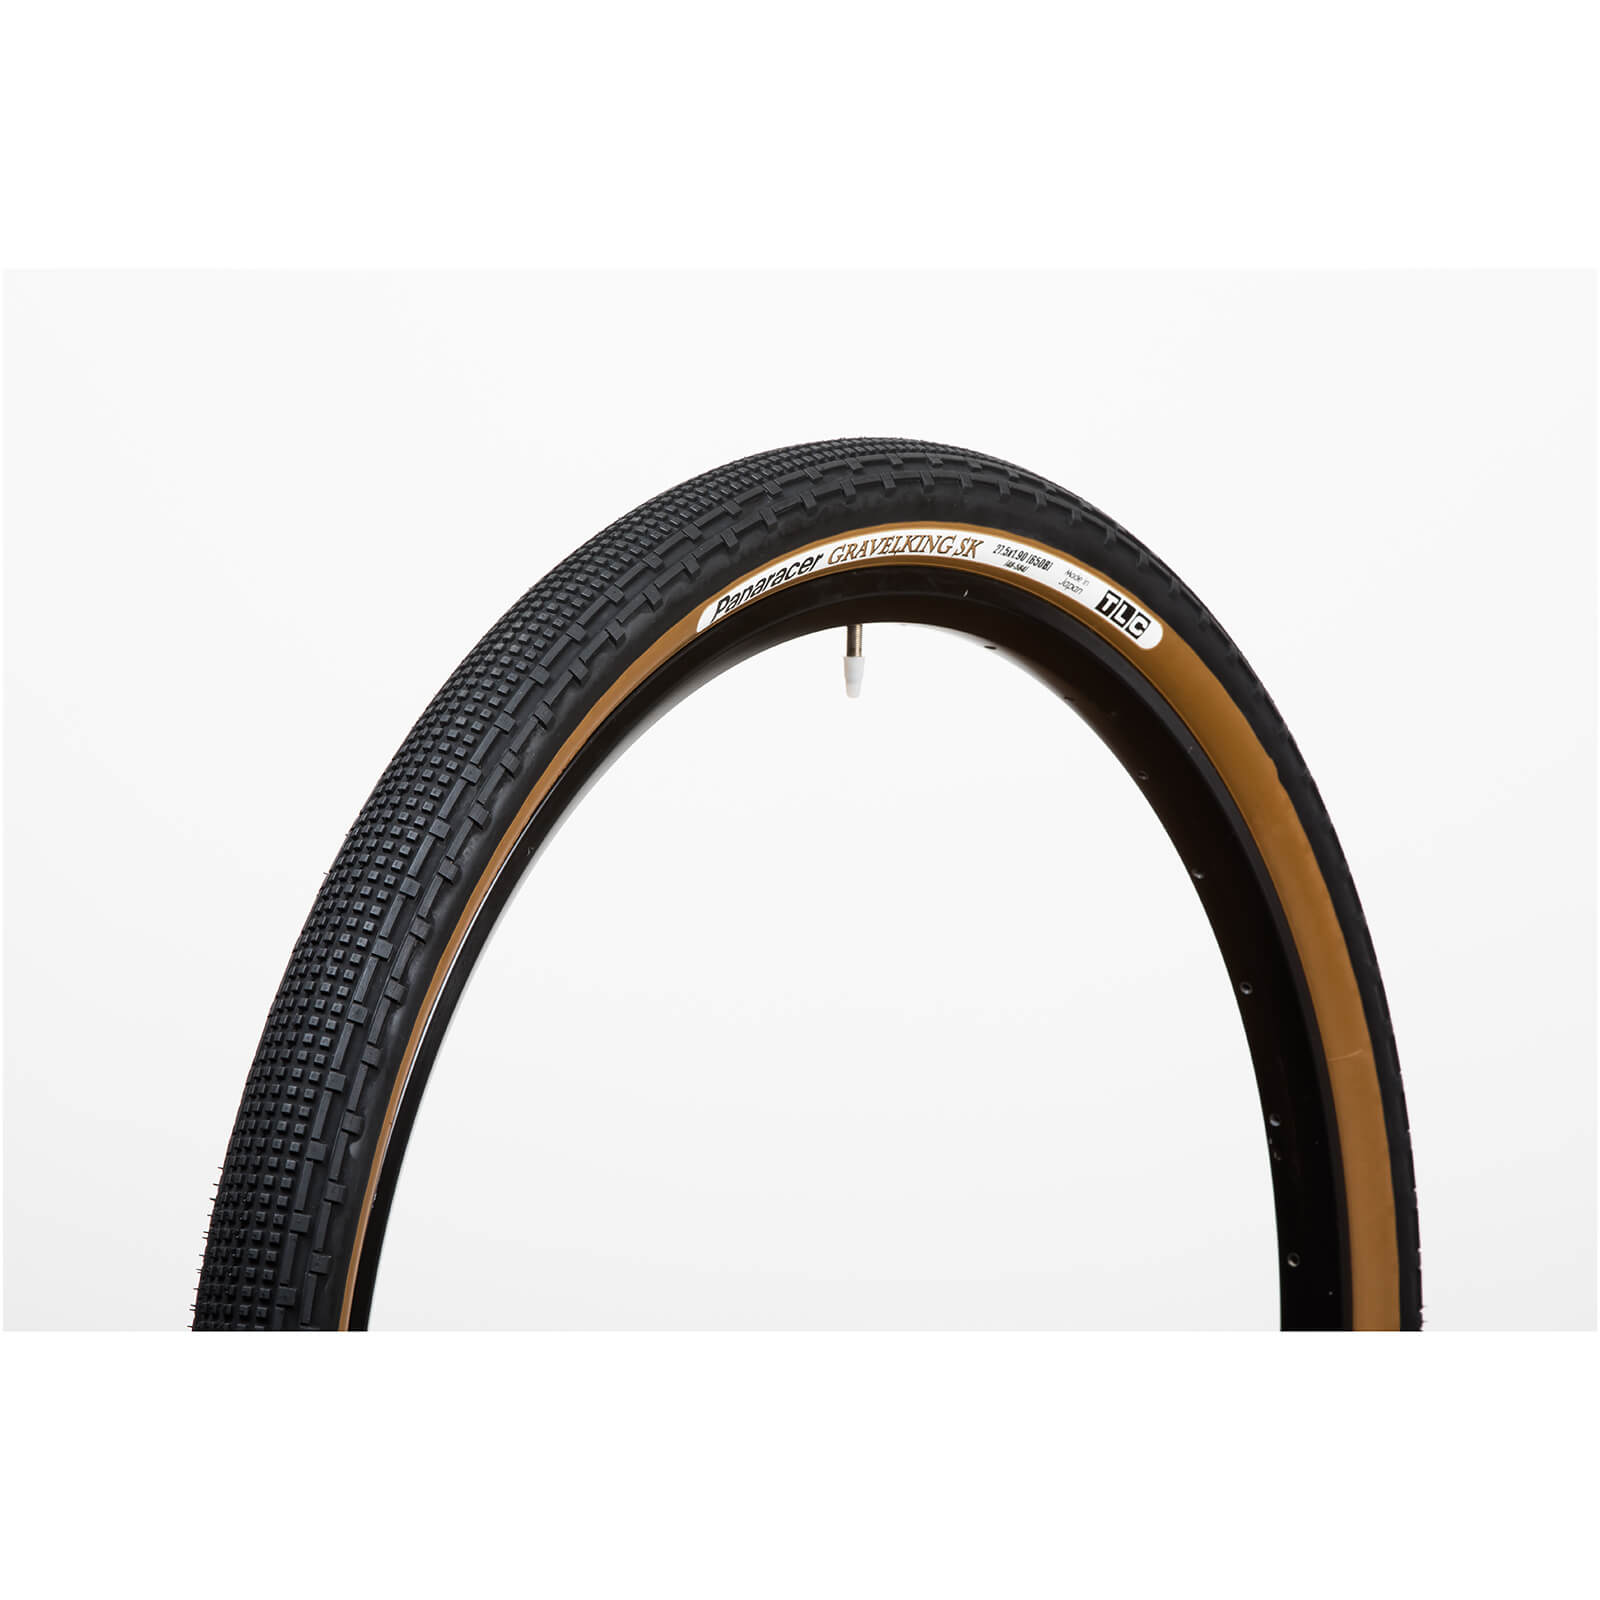 Panaracer Gravel King SK Tubeless Compatible Clincher Tyre - 27.5in x 1.90in - black/brown